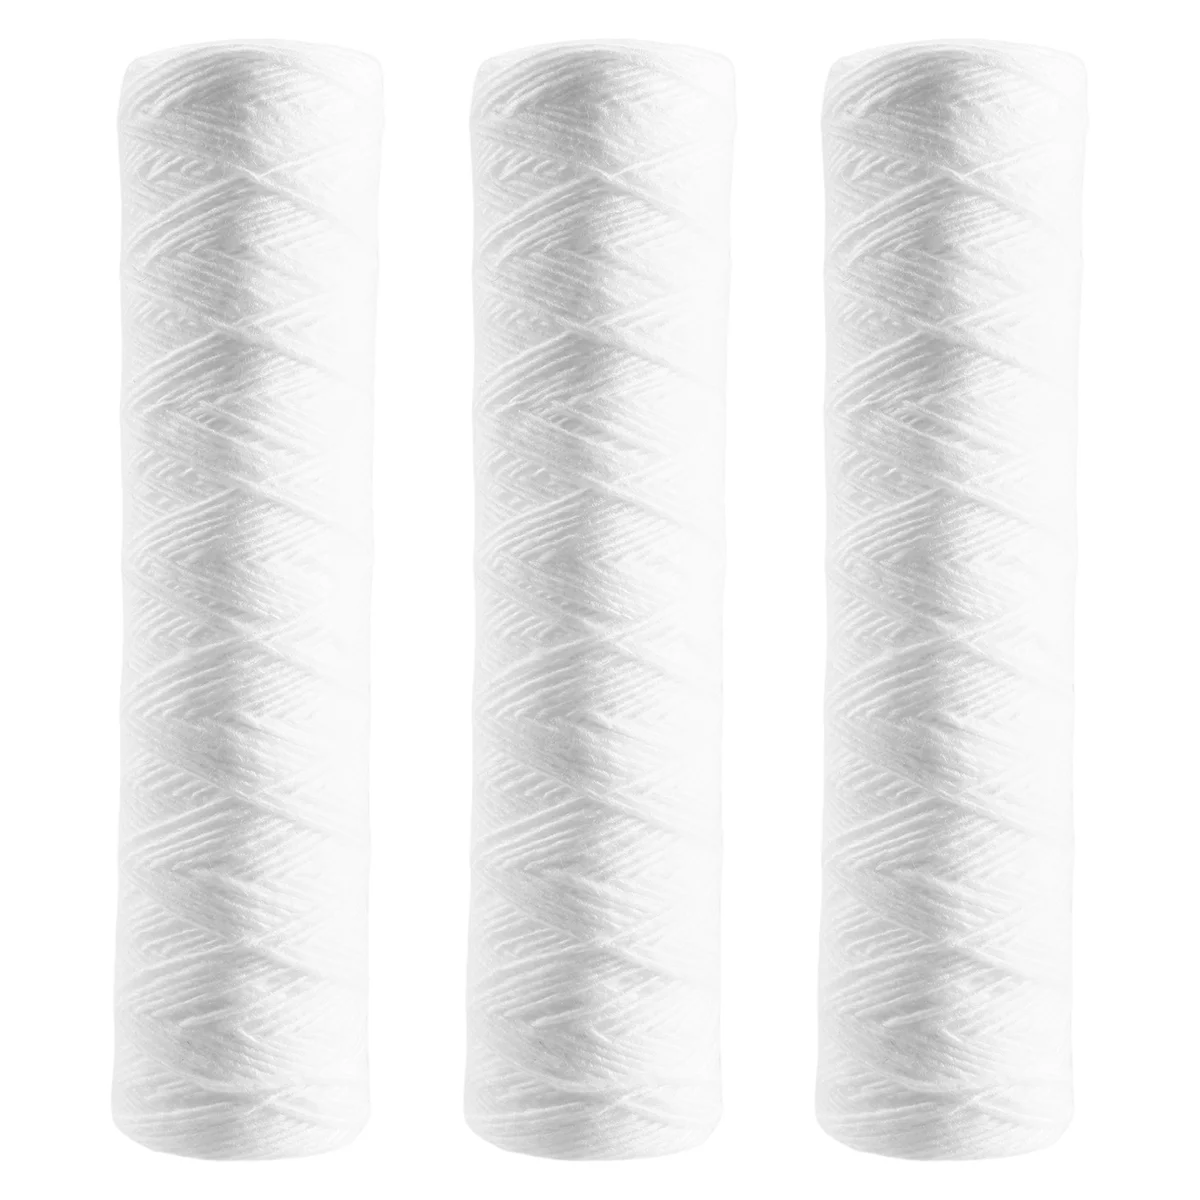 

3Pcs Water Purifier 10 Inch String Wound Filter Cartridge 5 Micrometre PP Cotton Filter Sedmient Filter